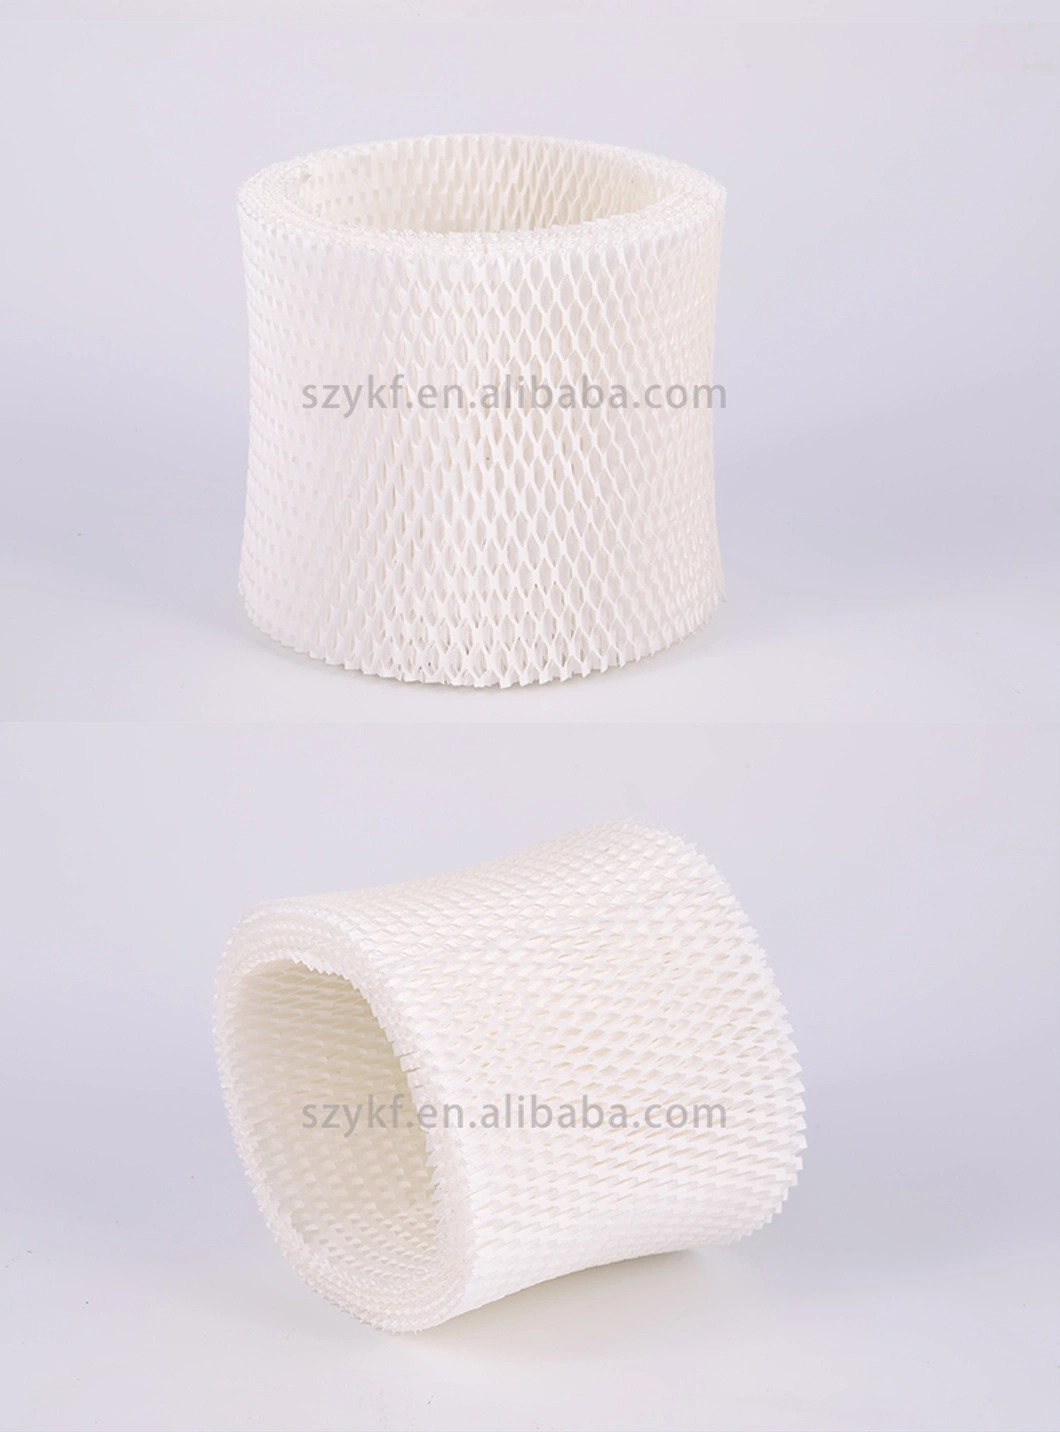 UNM Whiter Durable Wholesale Price High Quality Filter Replace Accessories for HC-88 Humidifier Filters